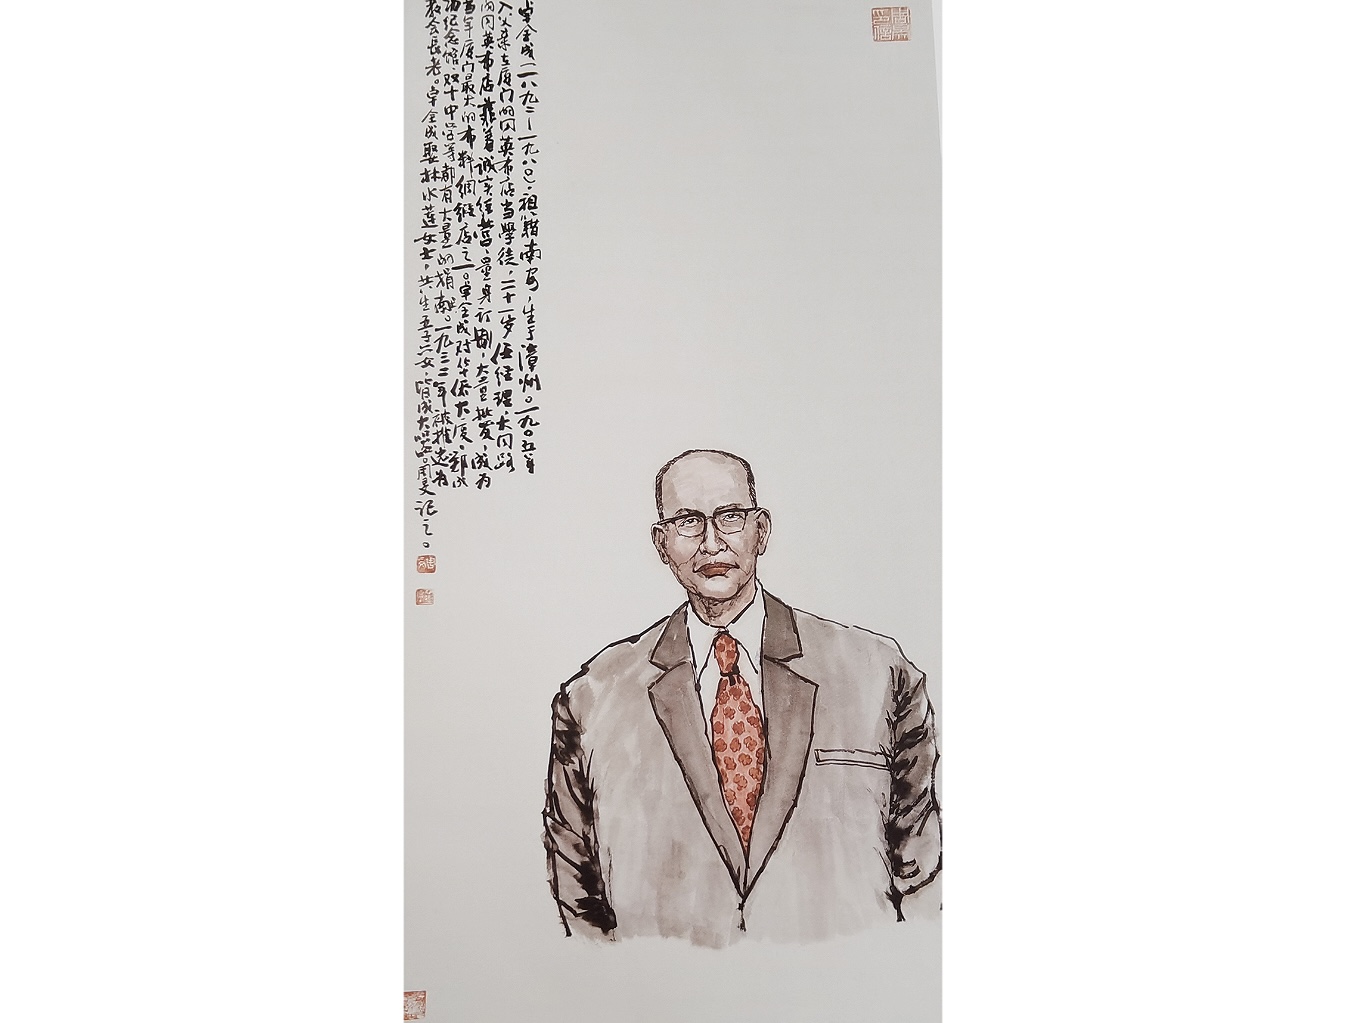 A picture of the Chinese-style portrait of Elder Zhuo Quancheng with a narrative of his life story crafted by Zhoumin